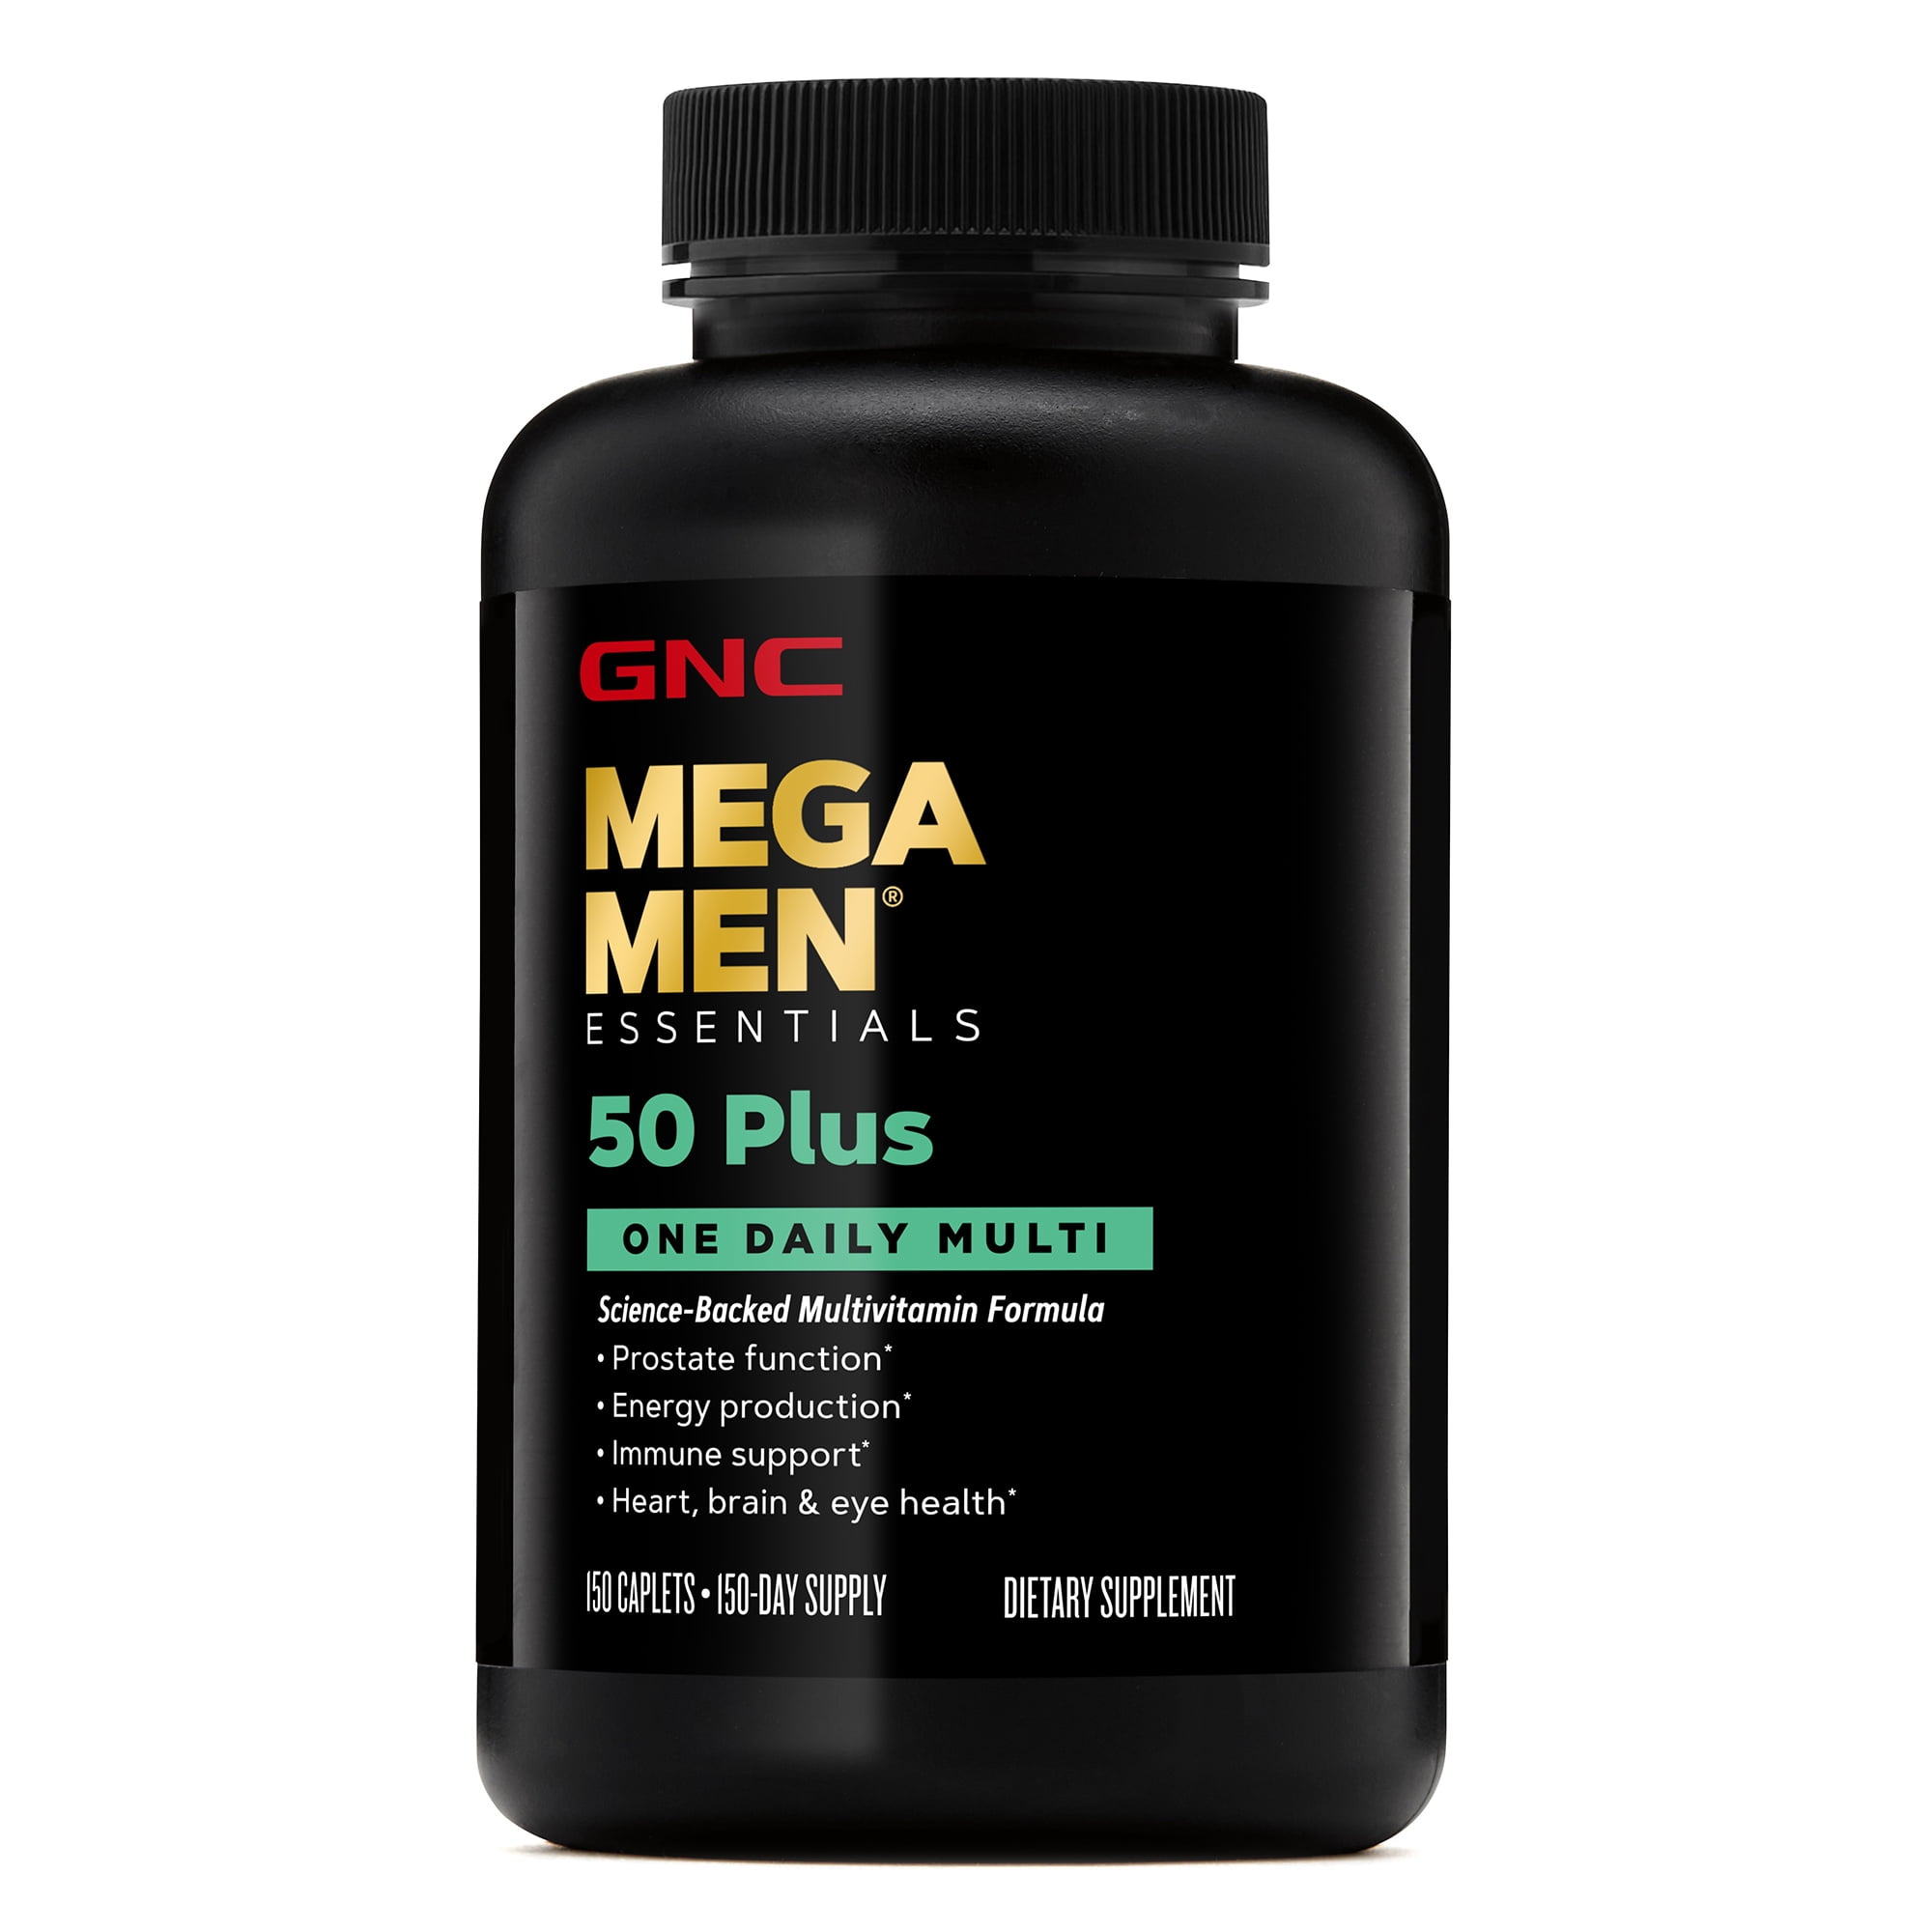 GNC Mega Men 50-Plus One Daily Multivitamin Value Size, 150 Tablets, Vitamin and Minerals for Males 50 and over